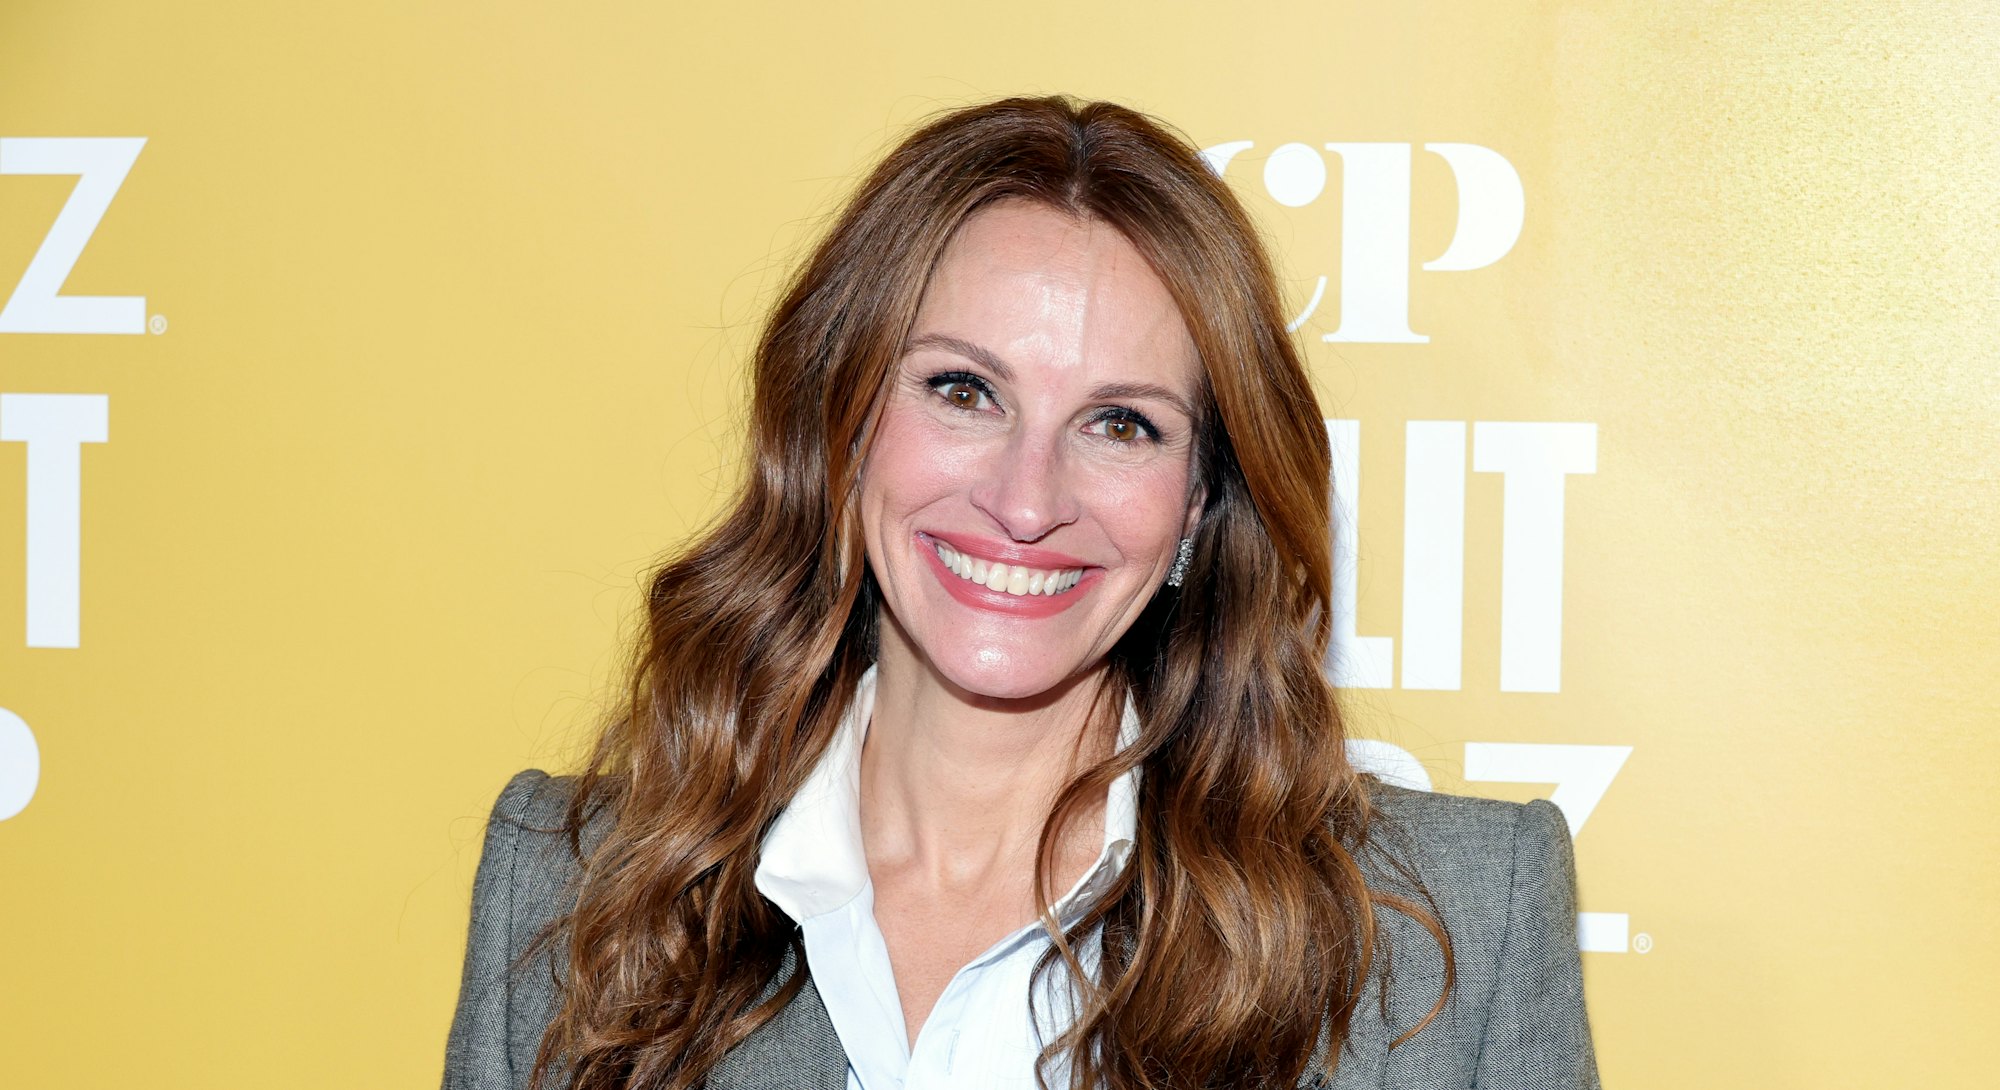 Julia Roberts has had some amazing quotes on motherhood throughout the years.